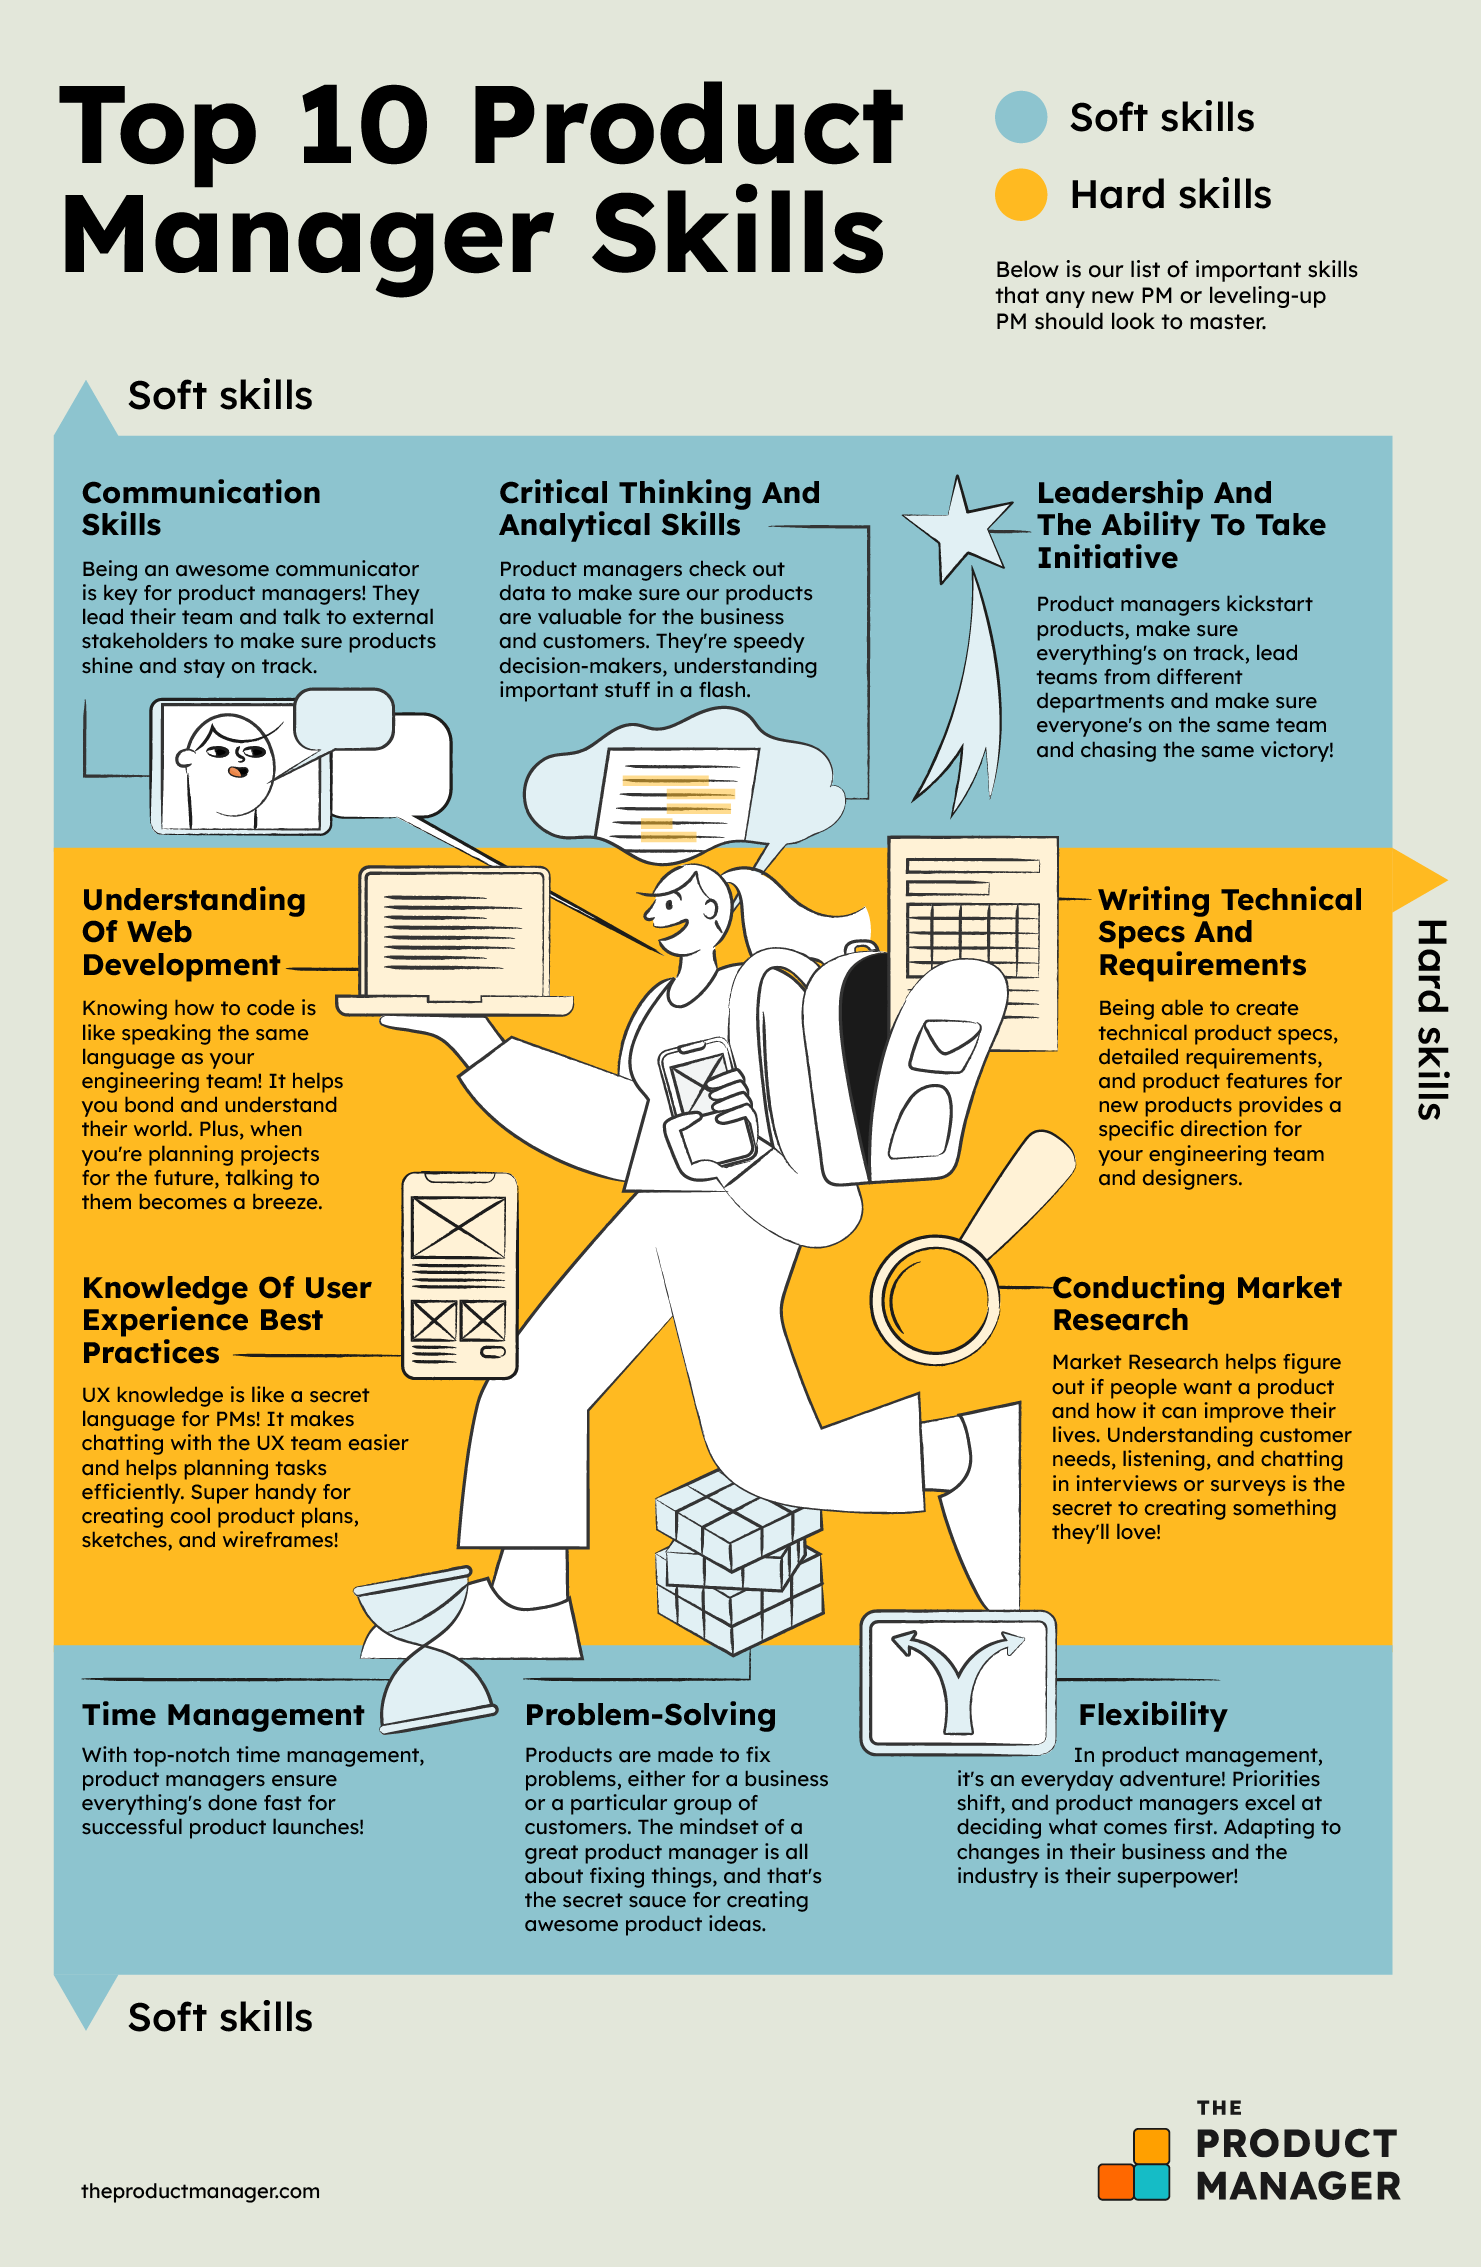 An infographic profiling the top 10 product management skills: communication skills, critical thinking and analytical skills, leadership, understanding of web development, technical writing, knowledge of UX best practices, market research skills, time management, problem-solving, and flexibility.